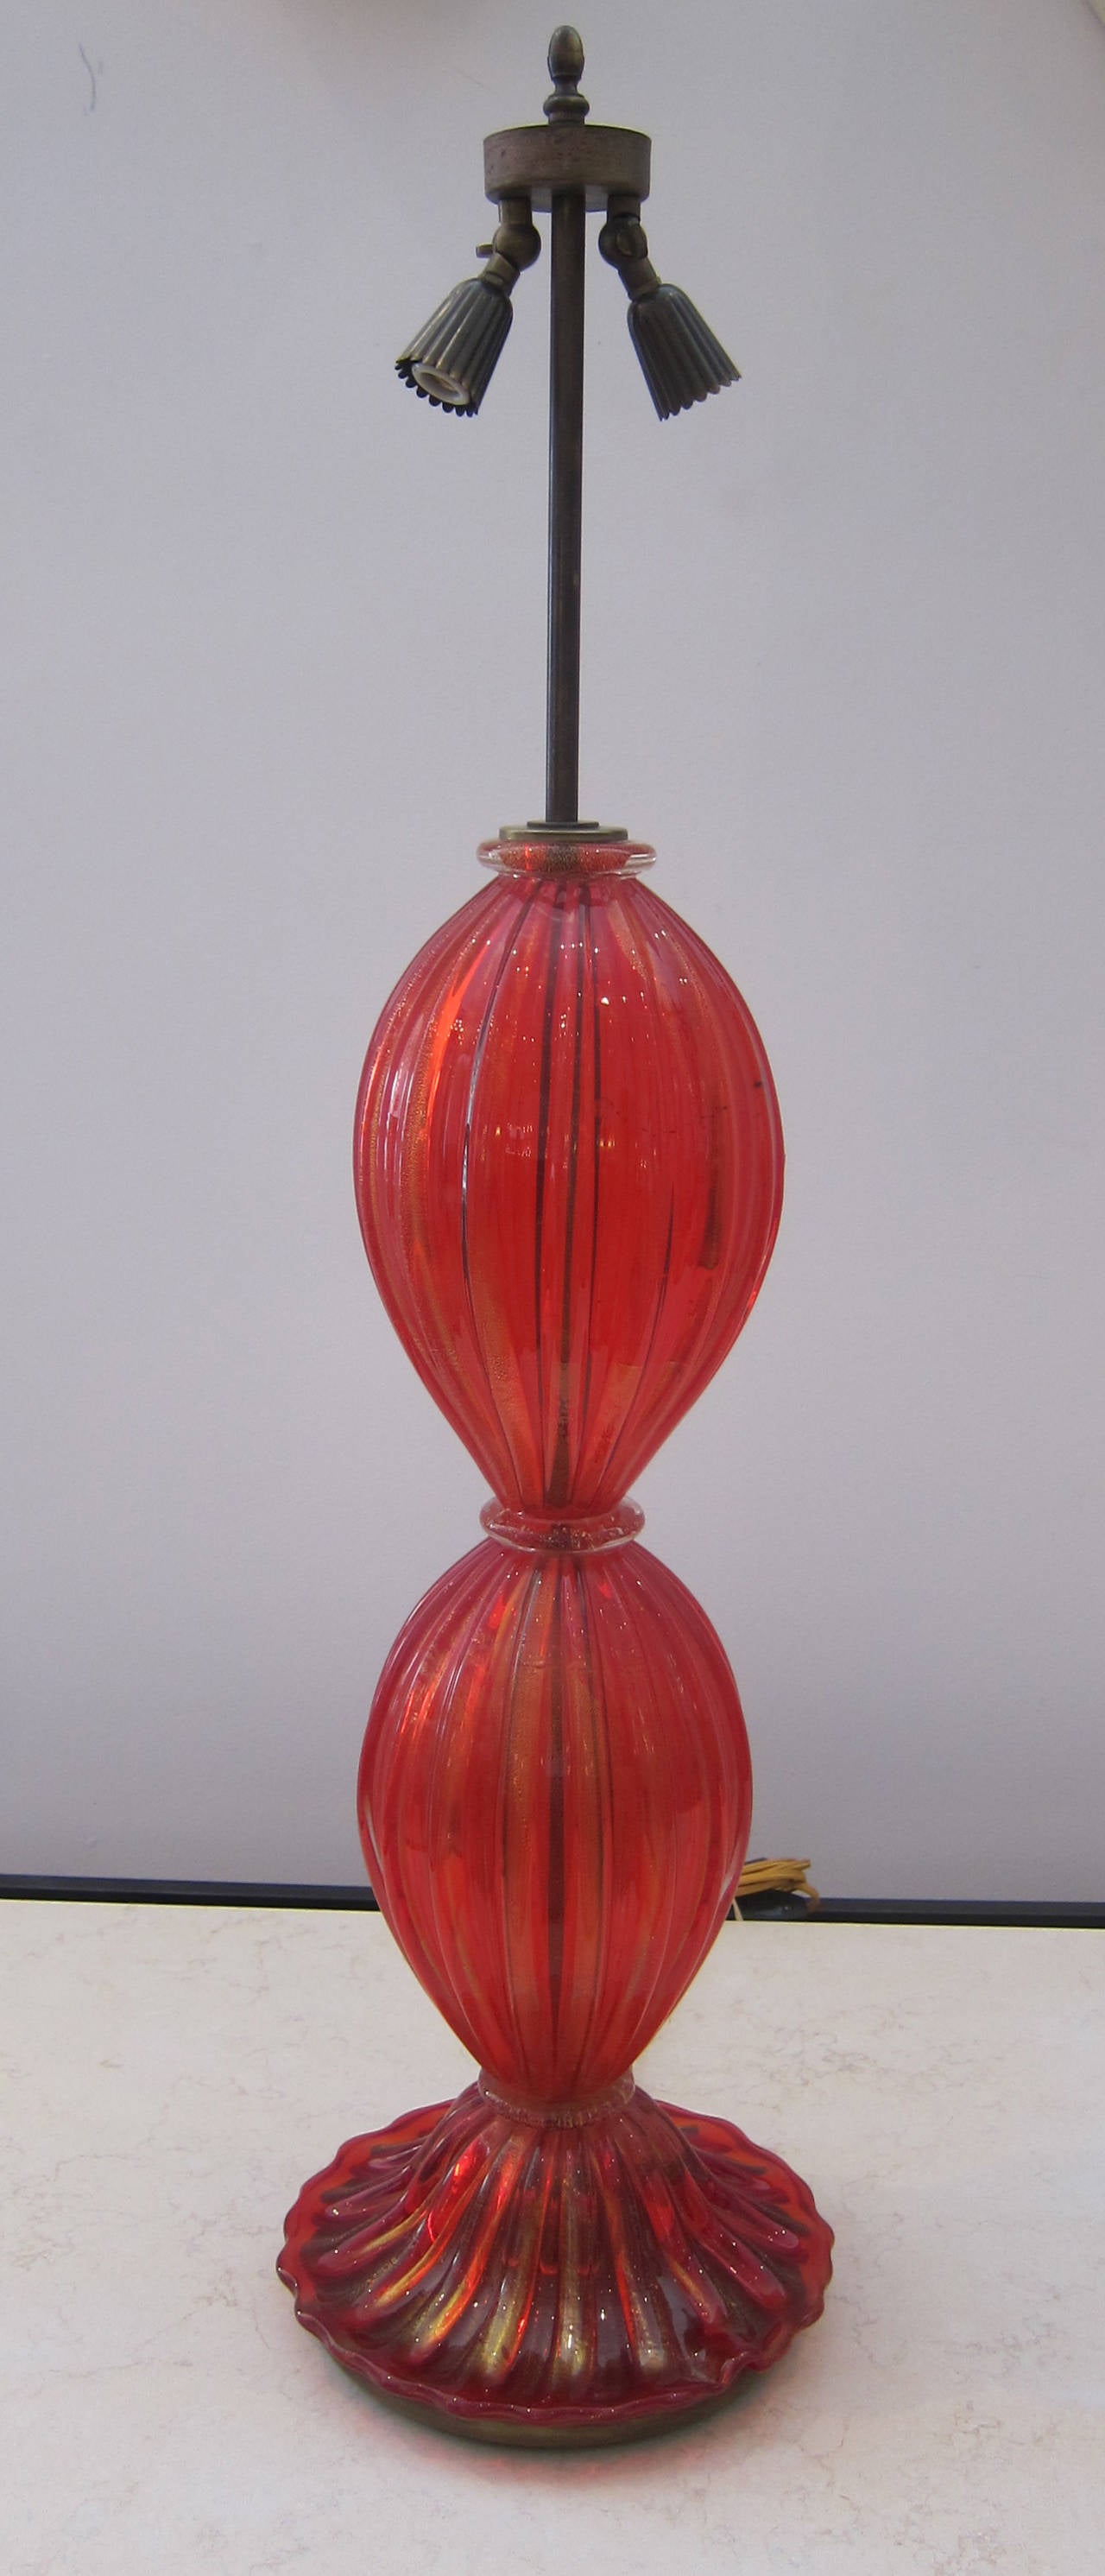  Vibrant Red Murano Glass Table Lamp by Barovier e Toso. Newly rewired. Signed